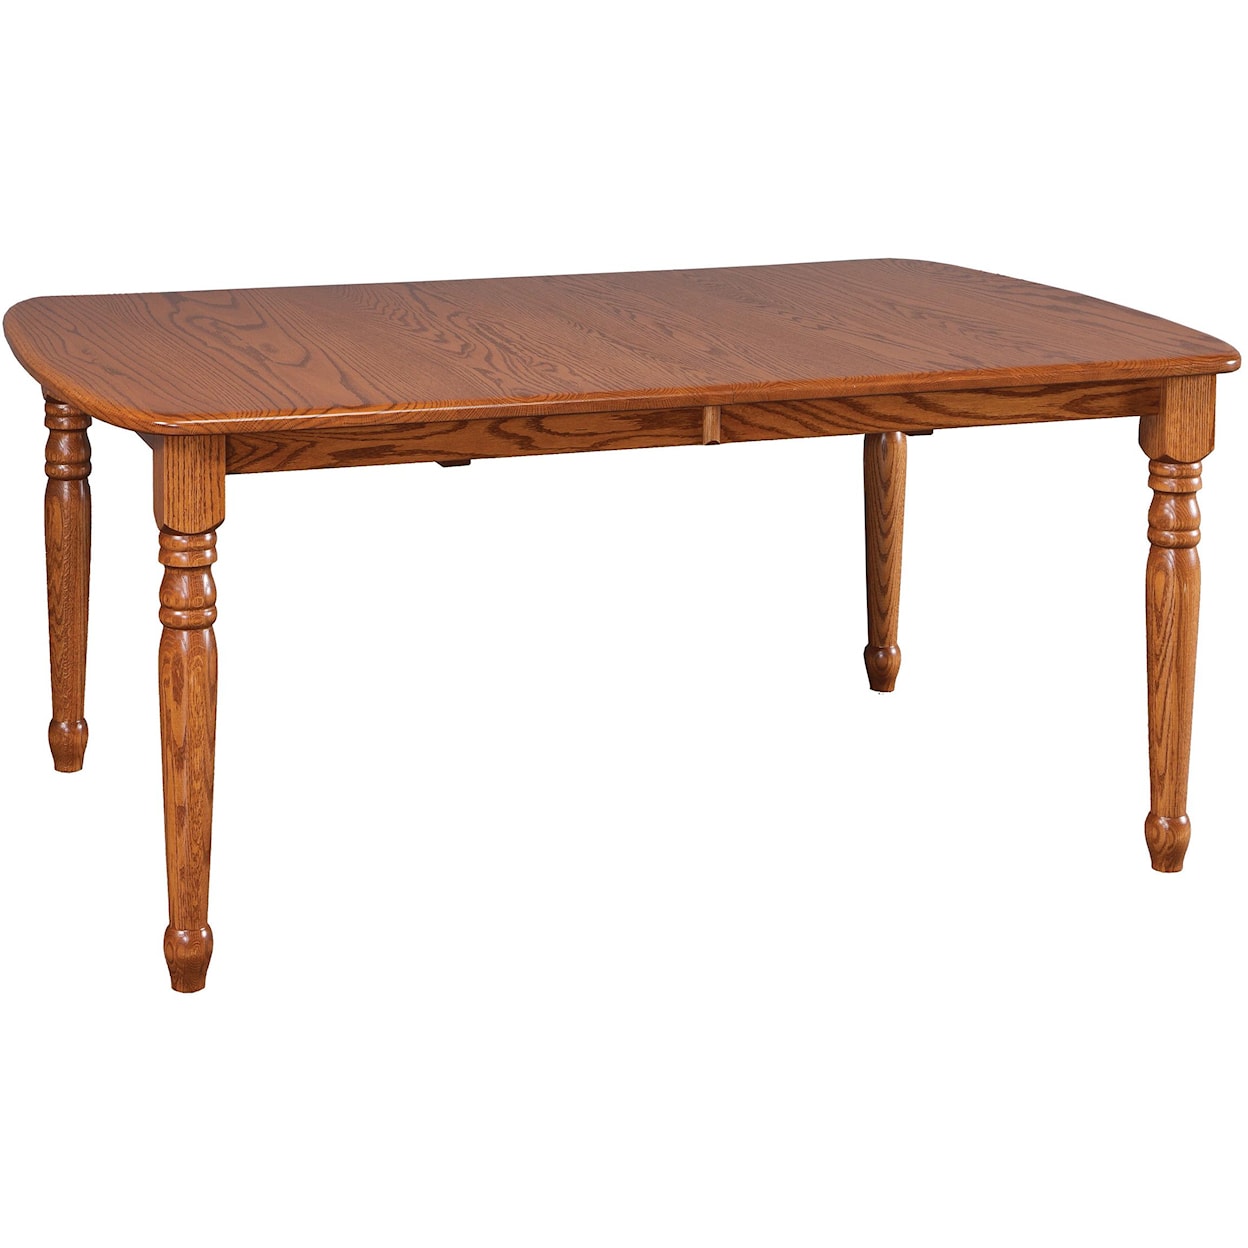 Daniel's Amish Tables 42" Solid Wood Table